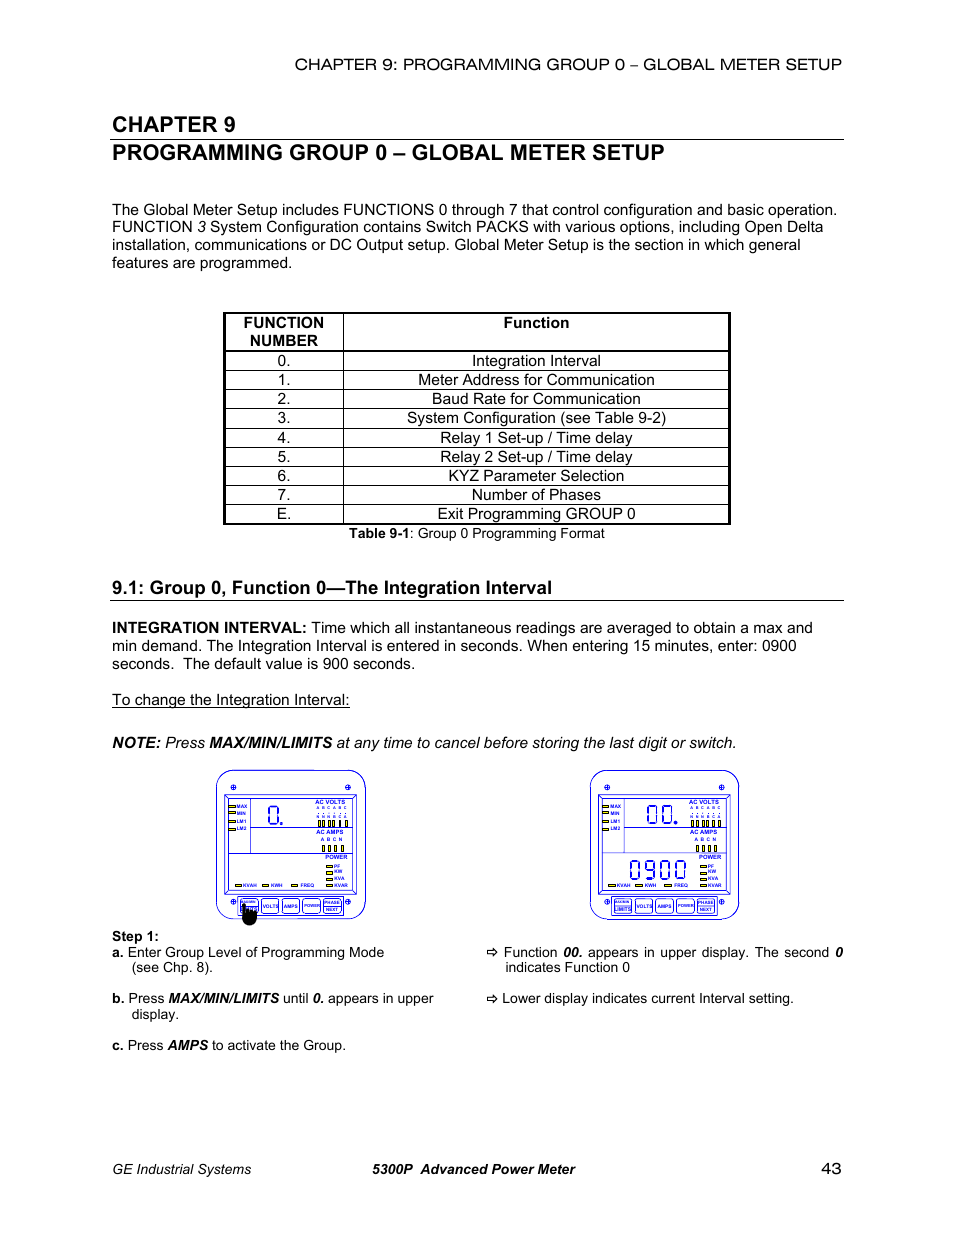 Group 0: global meter setup, Function 0: the integration interval, Chapter 9 programming group 0 – global meter setup | Group 0, function 0—the integration interval, Ge industrial systems 5300p advanced power meter, Table 9-1 : group 0 programming format | GE EPM 5200 User Manual | Page 47 / 100